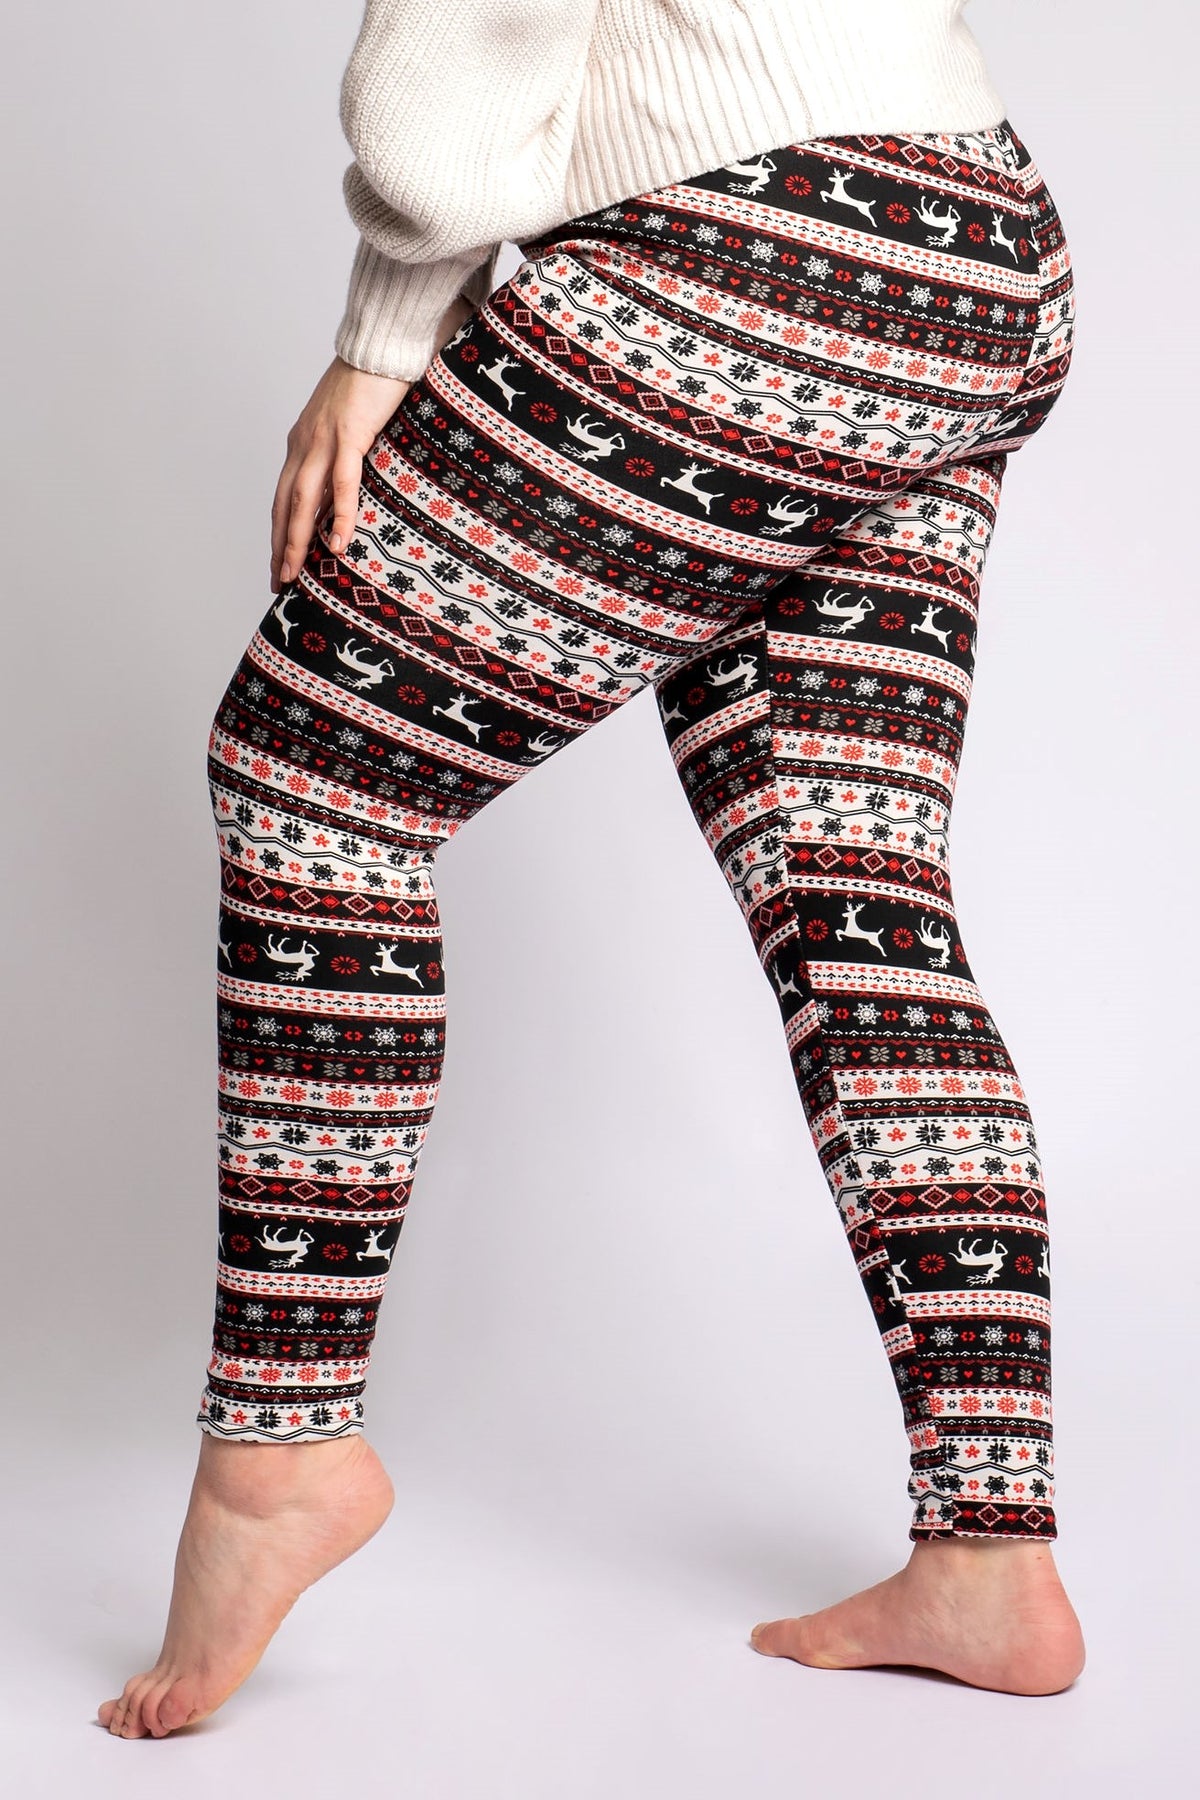 Where Are Just Cozy Leggings Manufactured Homes